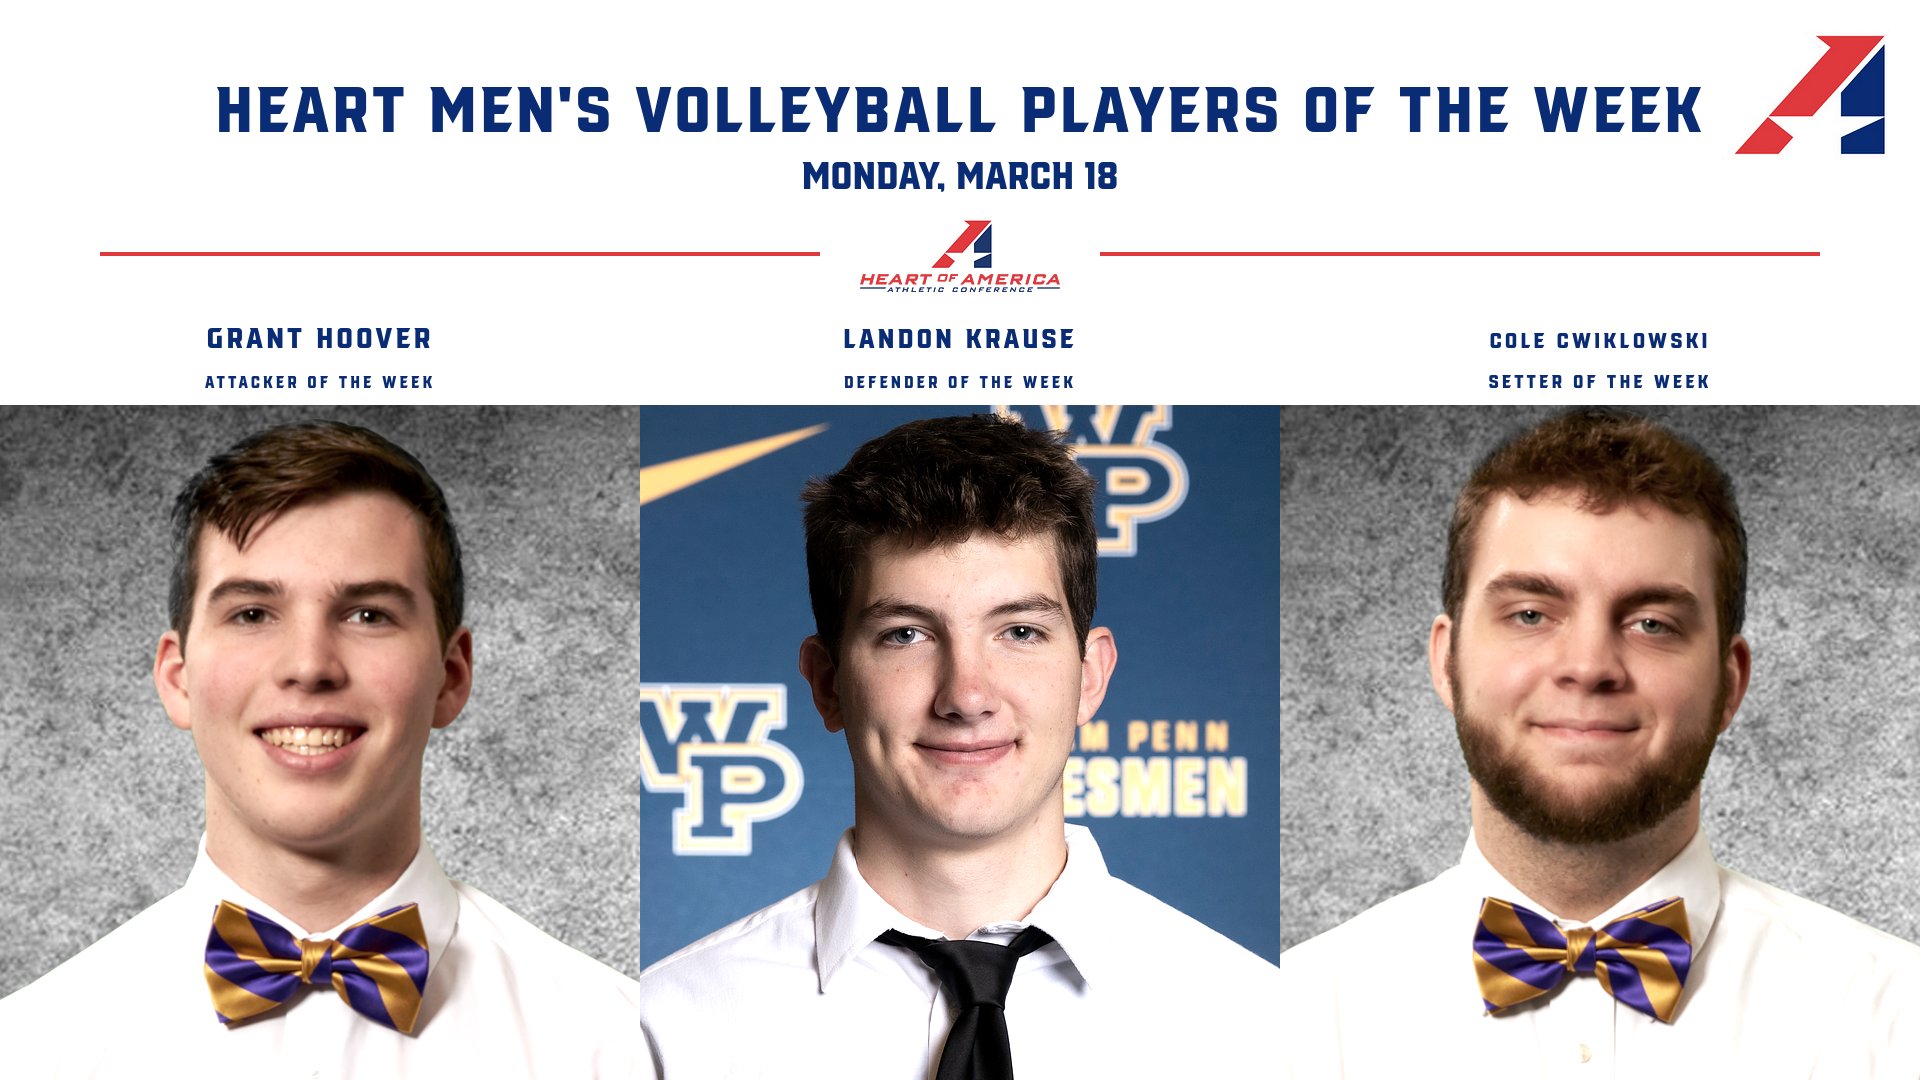 Heart Men’s Volleyball Players of the Week Announced – March 18